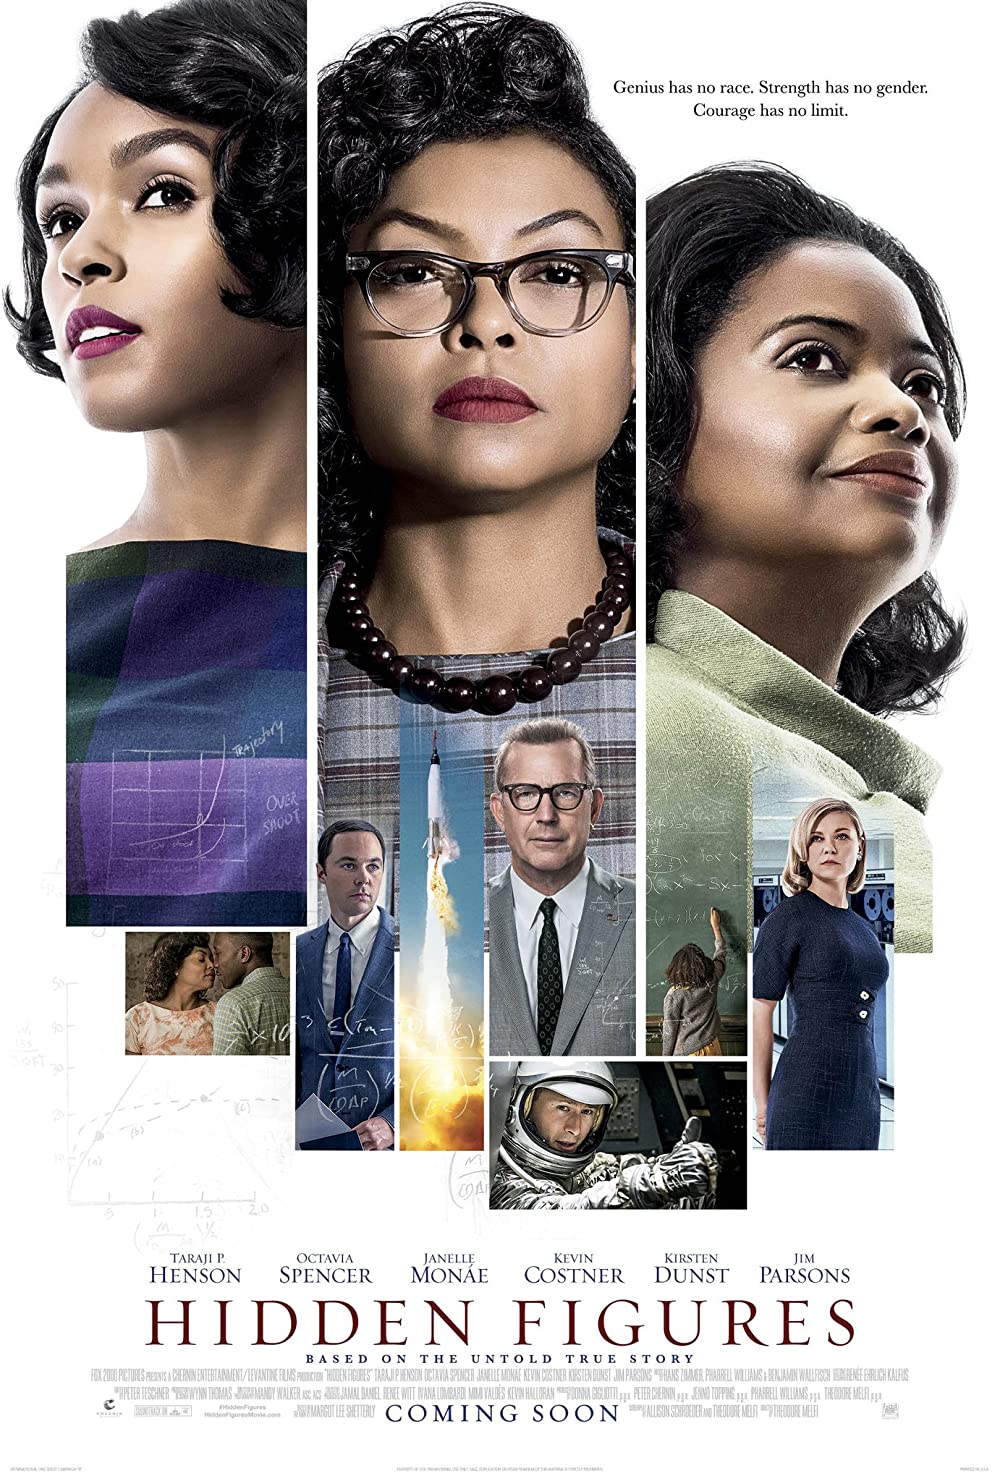 faces of three women and various cast members of hidden figures